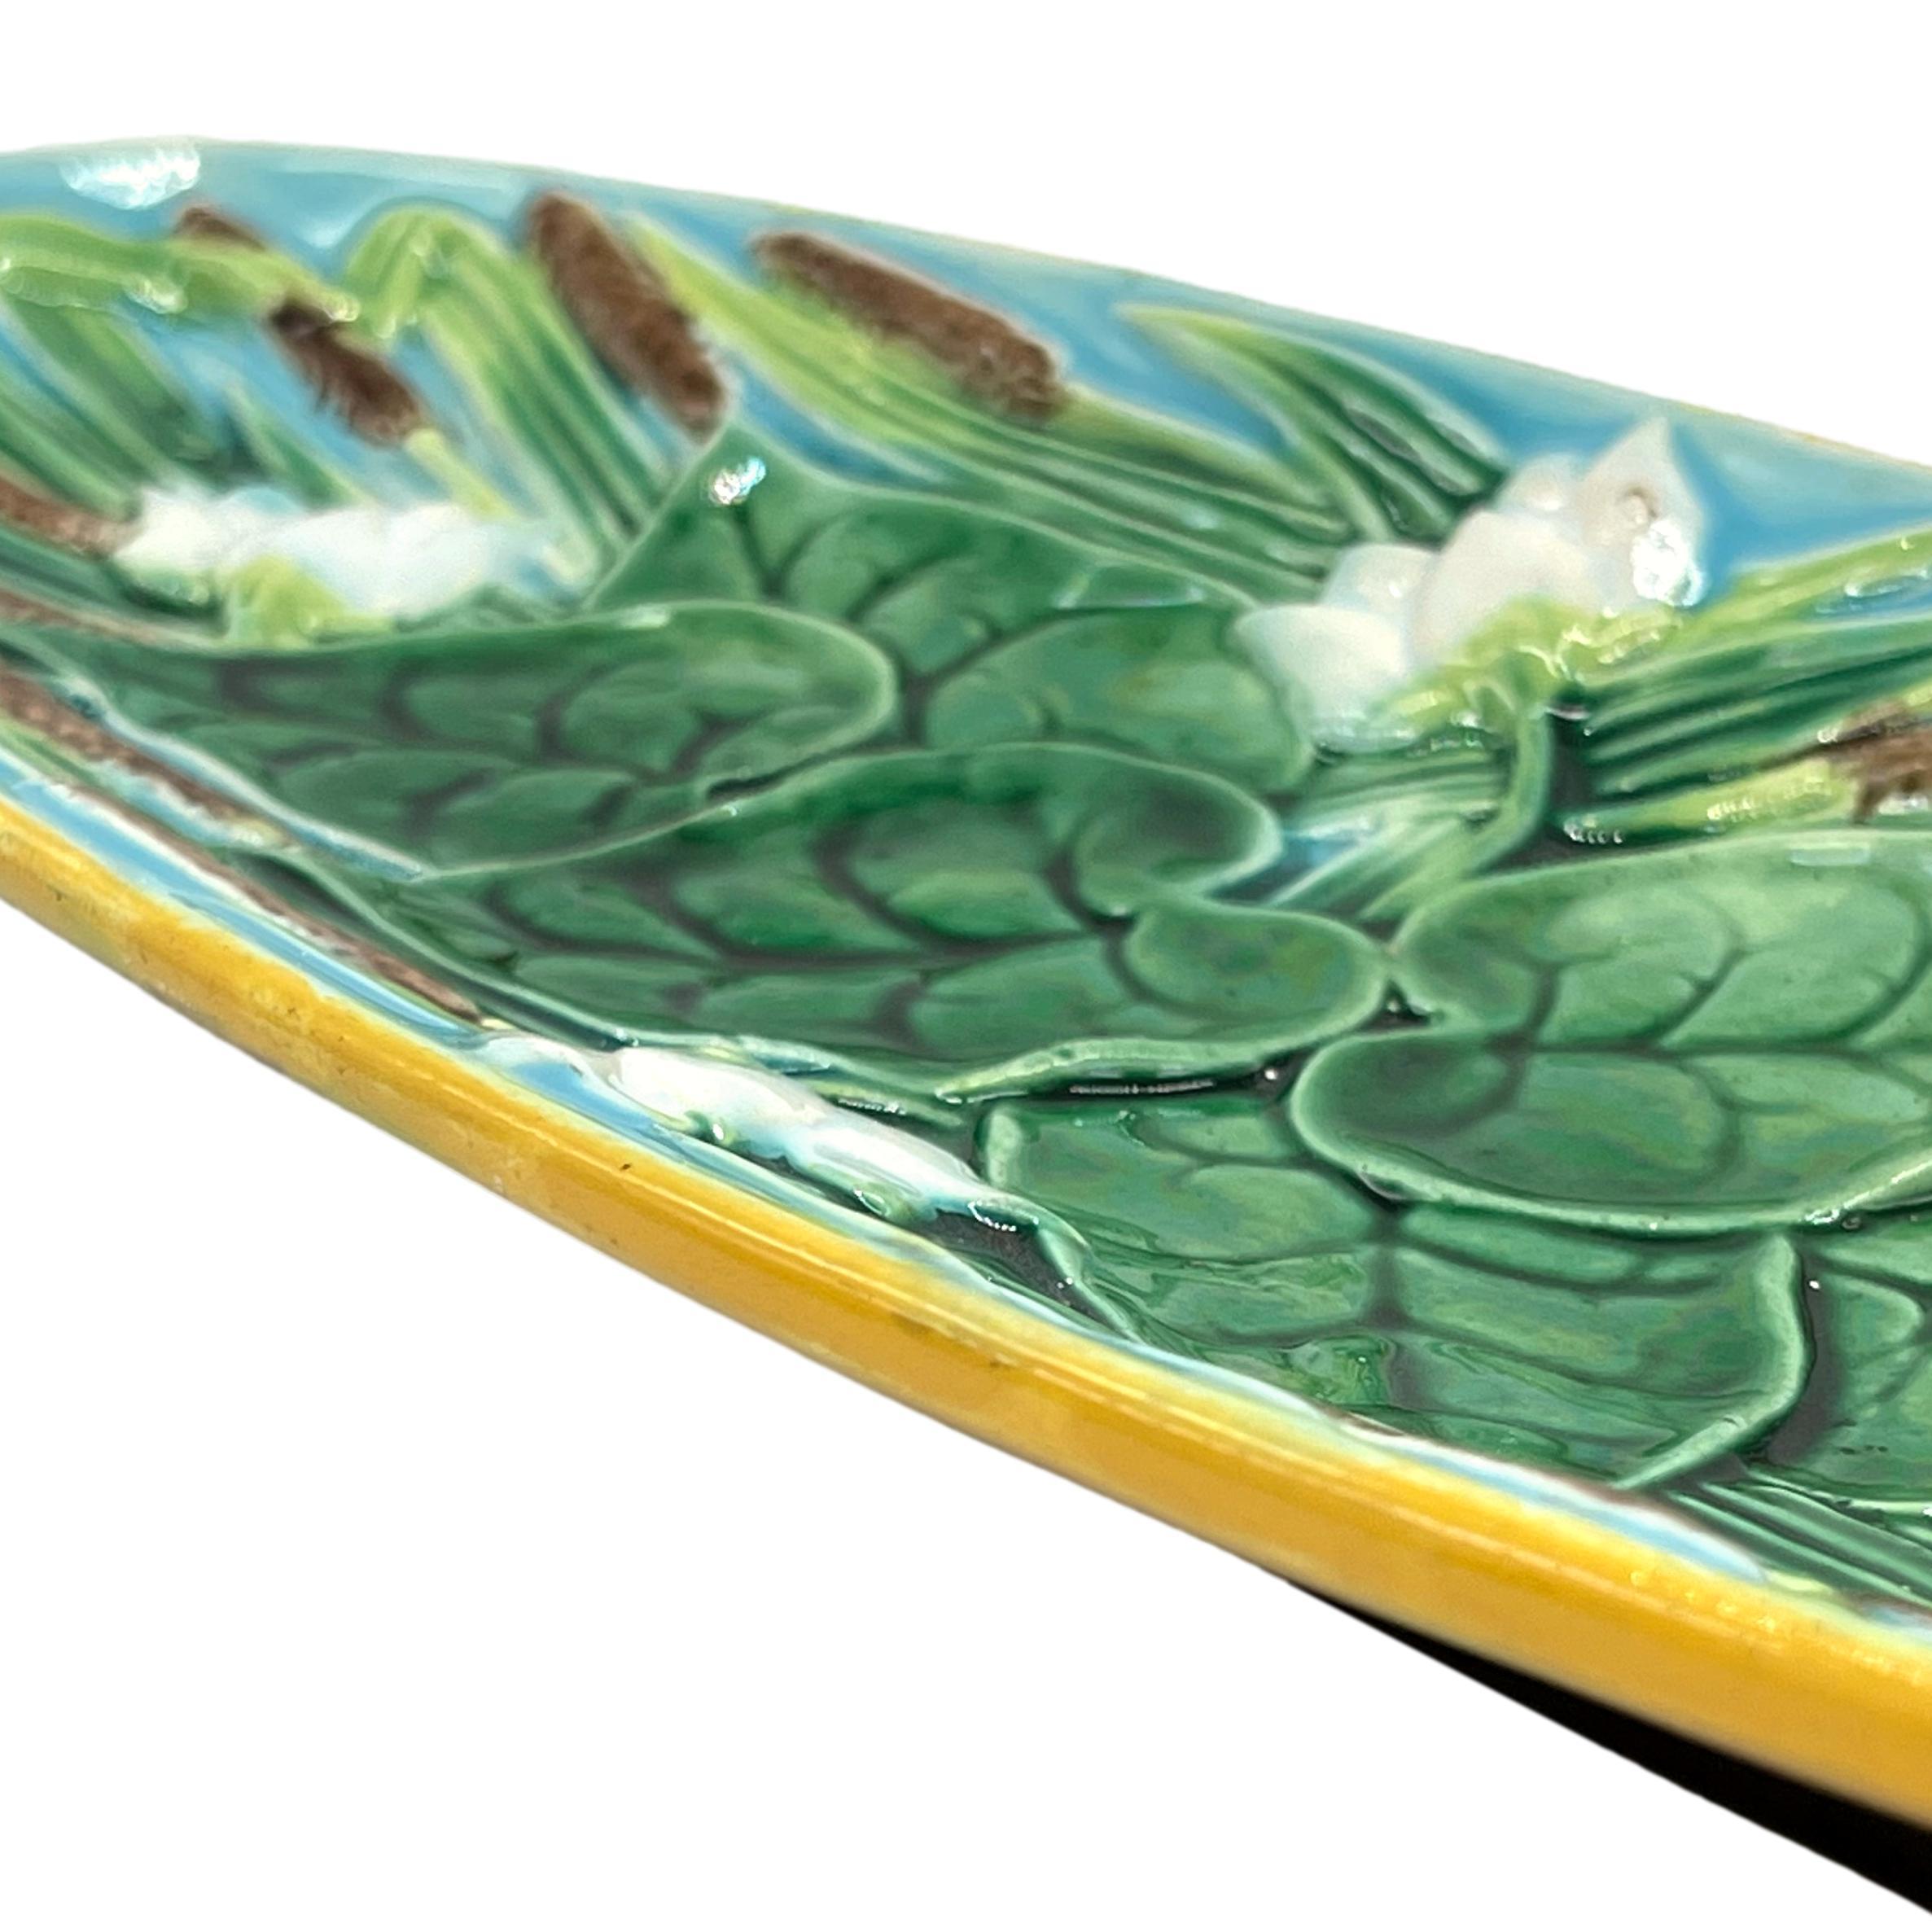 George Jones Majolica Pond Lilies and Bullrushes 10-in Tray, English, c. 1875 For Sale 2